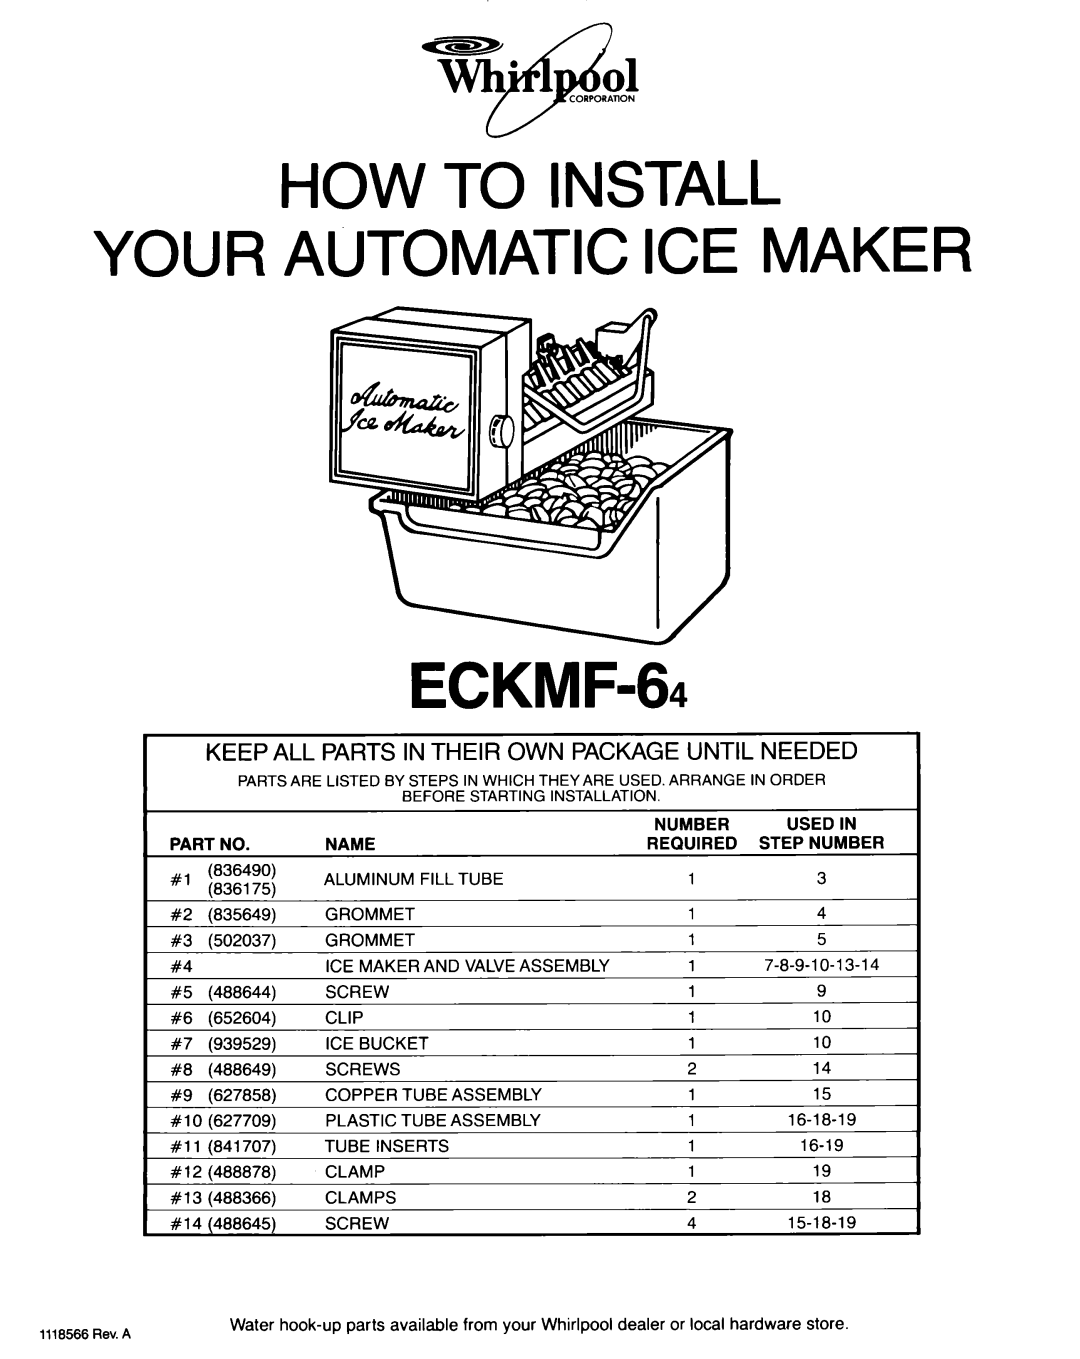 Whirlpool ECKMF-64 manual How To Install Your Automatic Ice Maker 